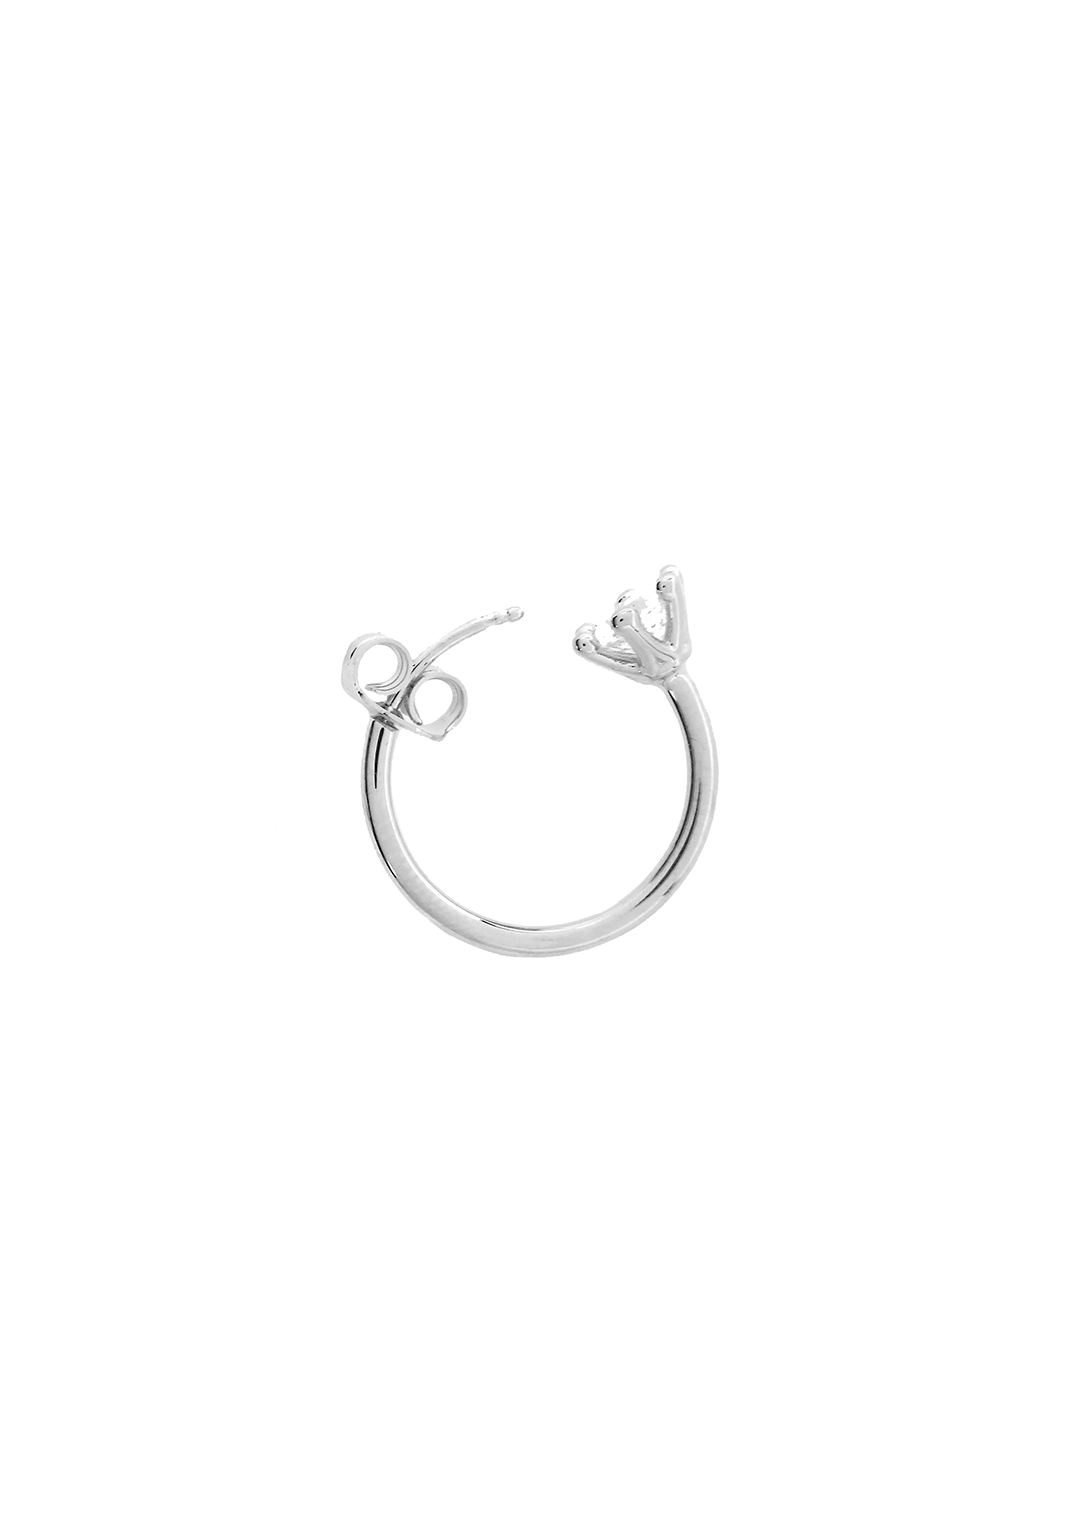 Solitaire Hoop Ring - Silver / White